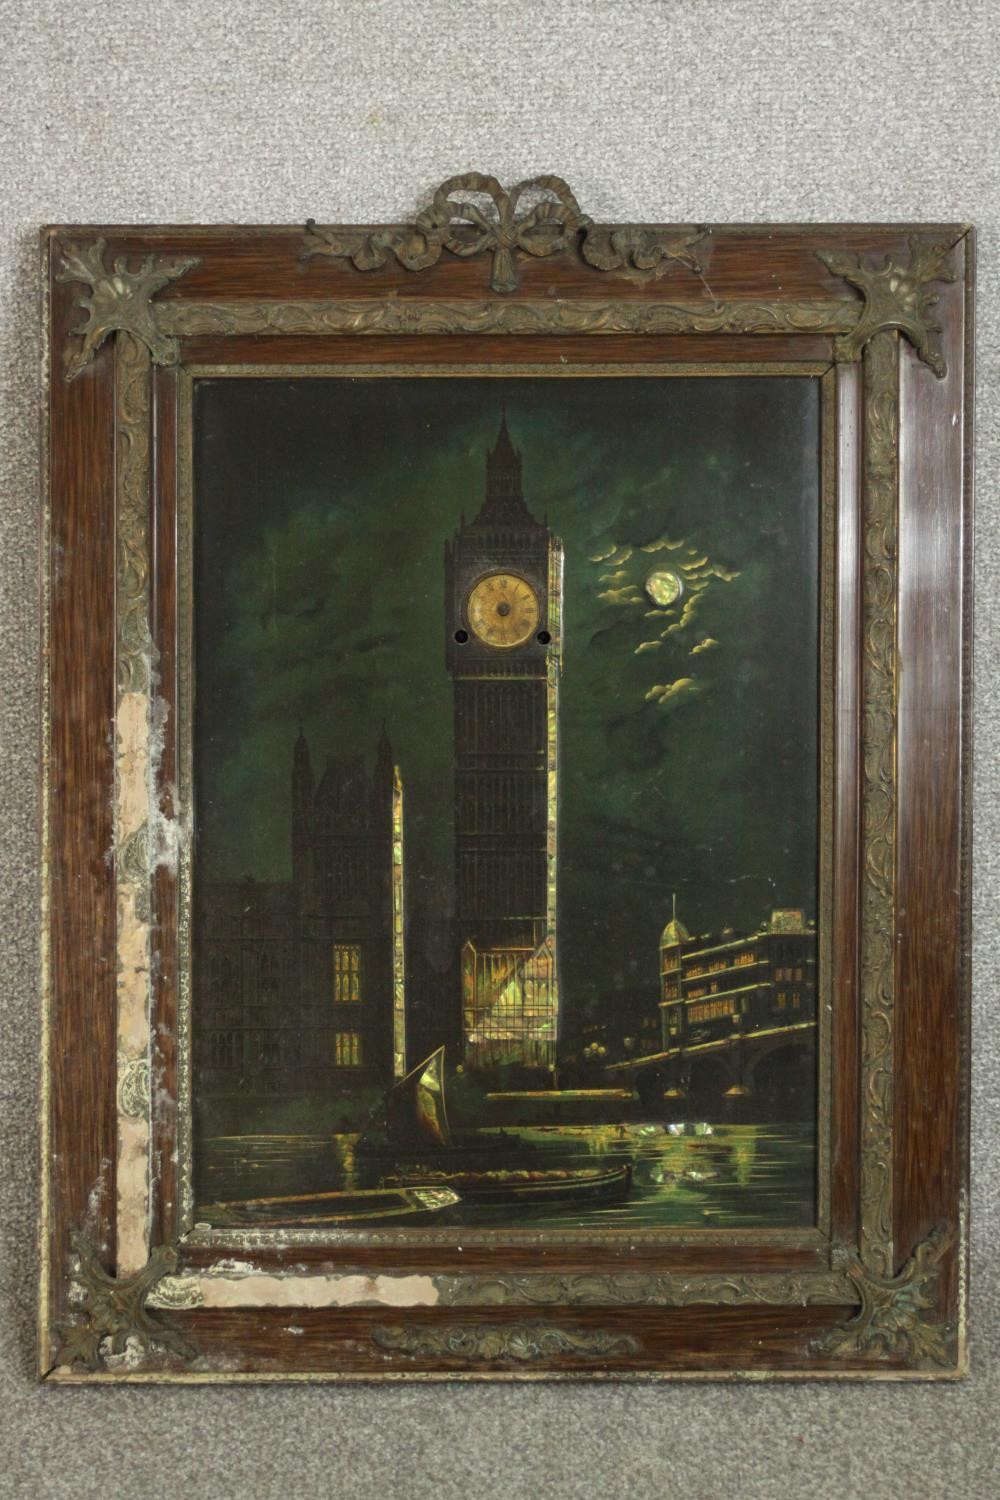 A Victorian mystery picture clock, the movement hidden behind a mother of pearl inlaid painting